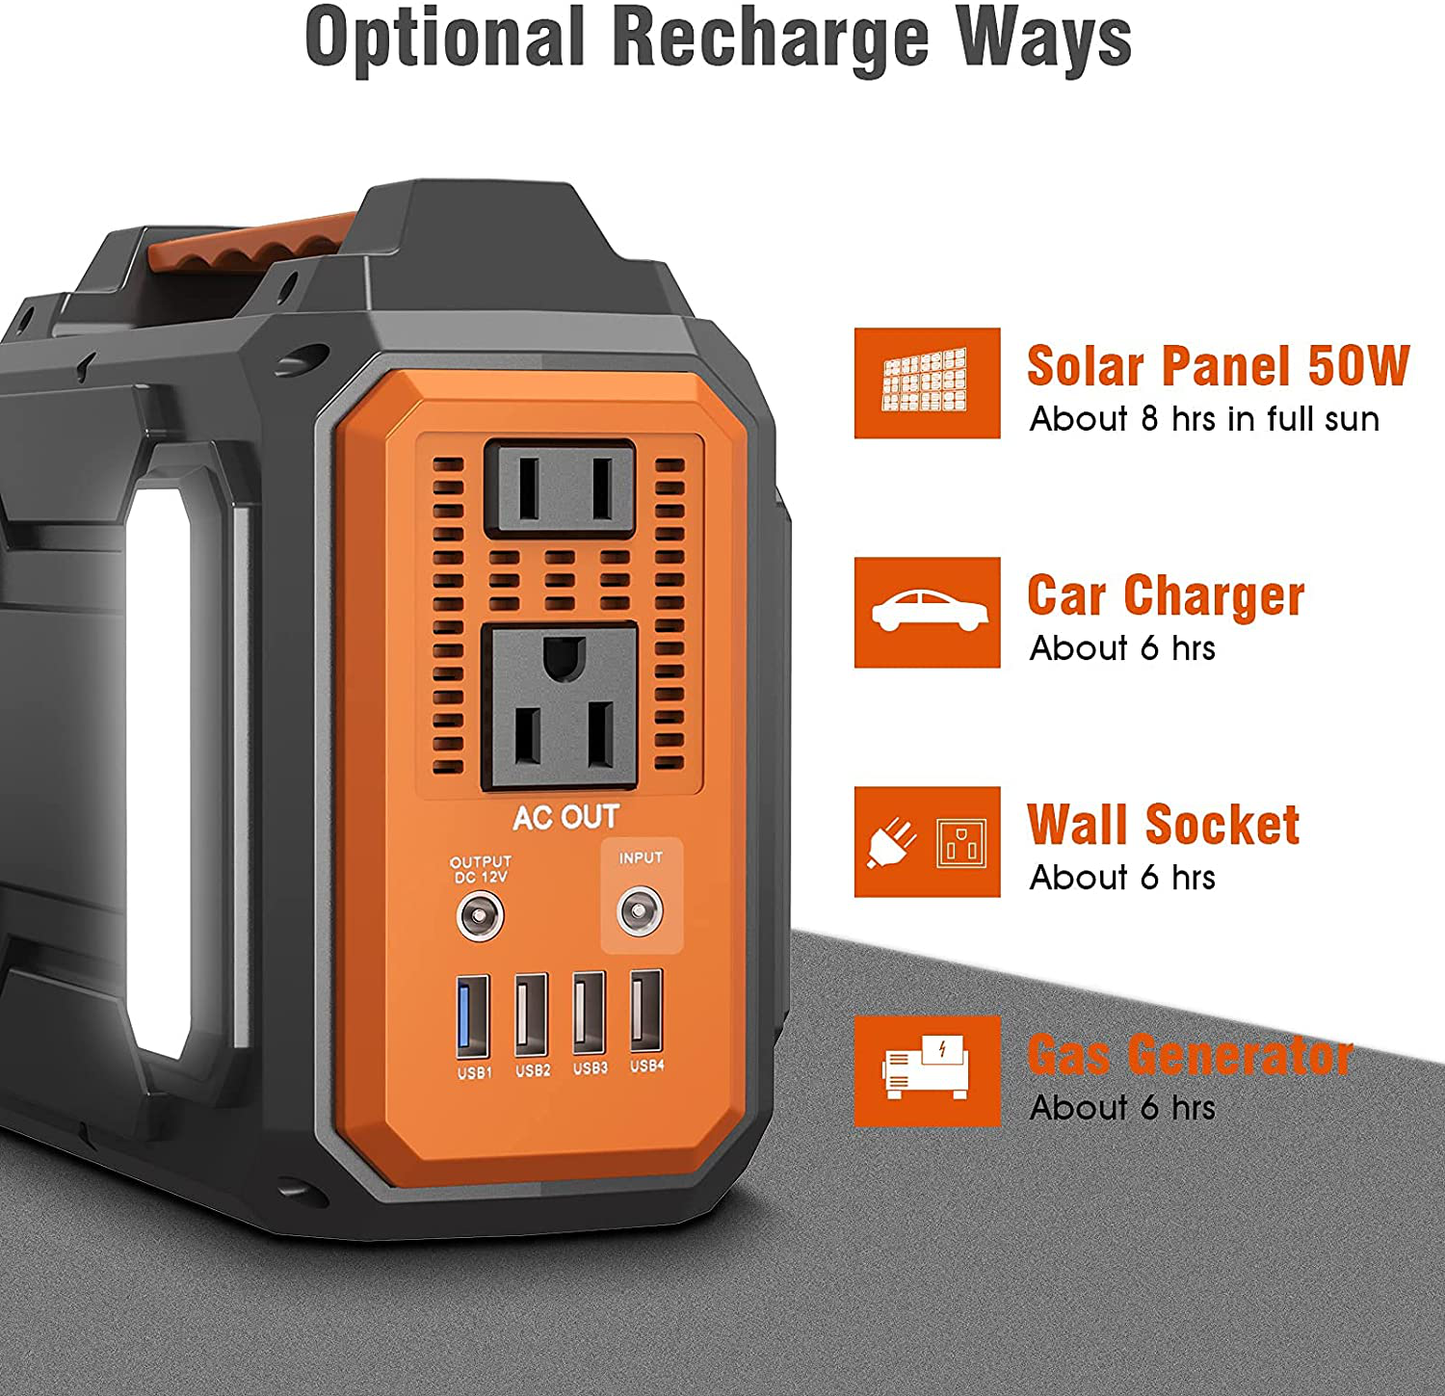 Portable Power Station 300W,Solar Outdoor Generators 280Wh/75000mAh,Lithium Battery Backup power source with Flashlight,inverter generator with DC AC Outlet for Home Use Camping RV Travel Emergency